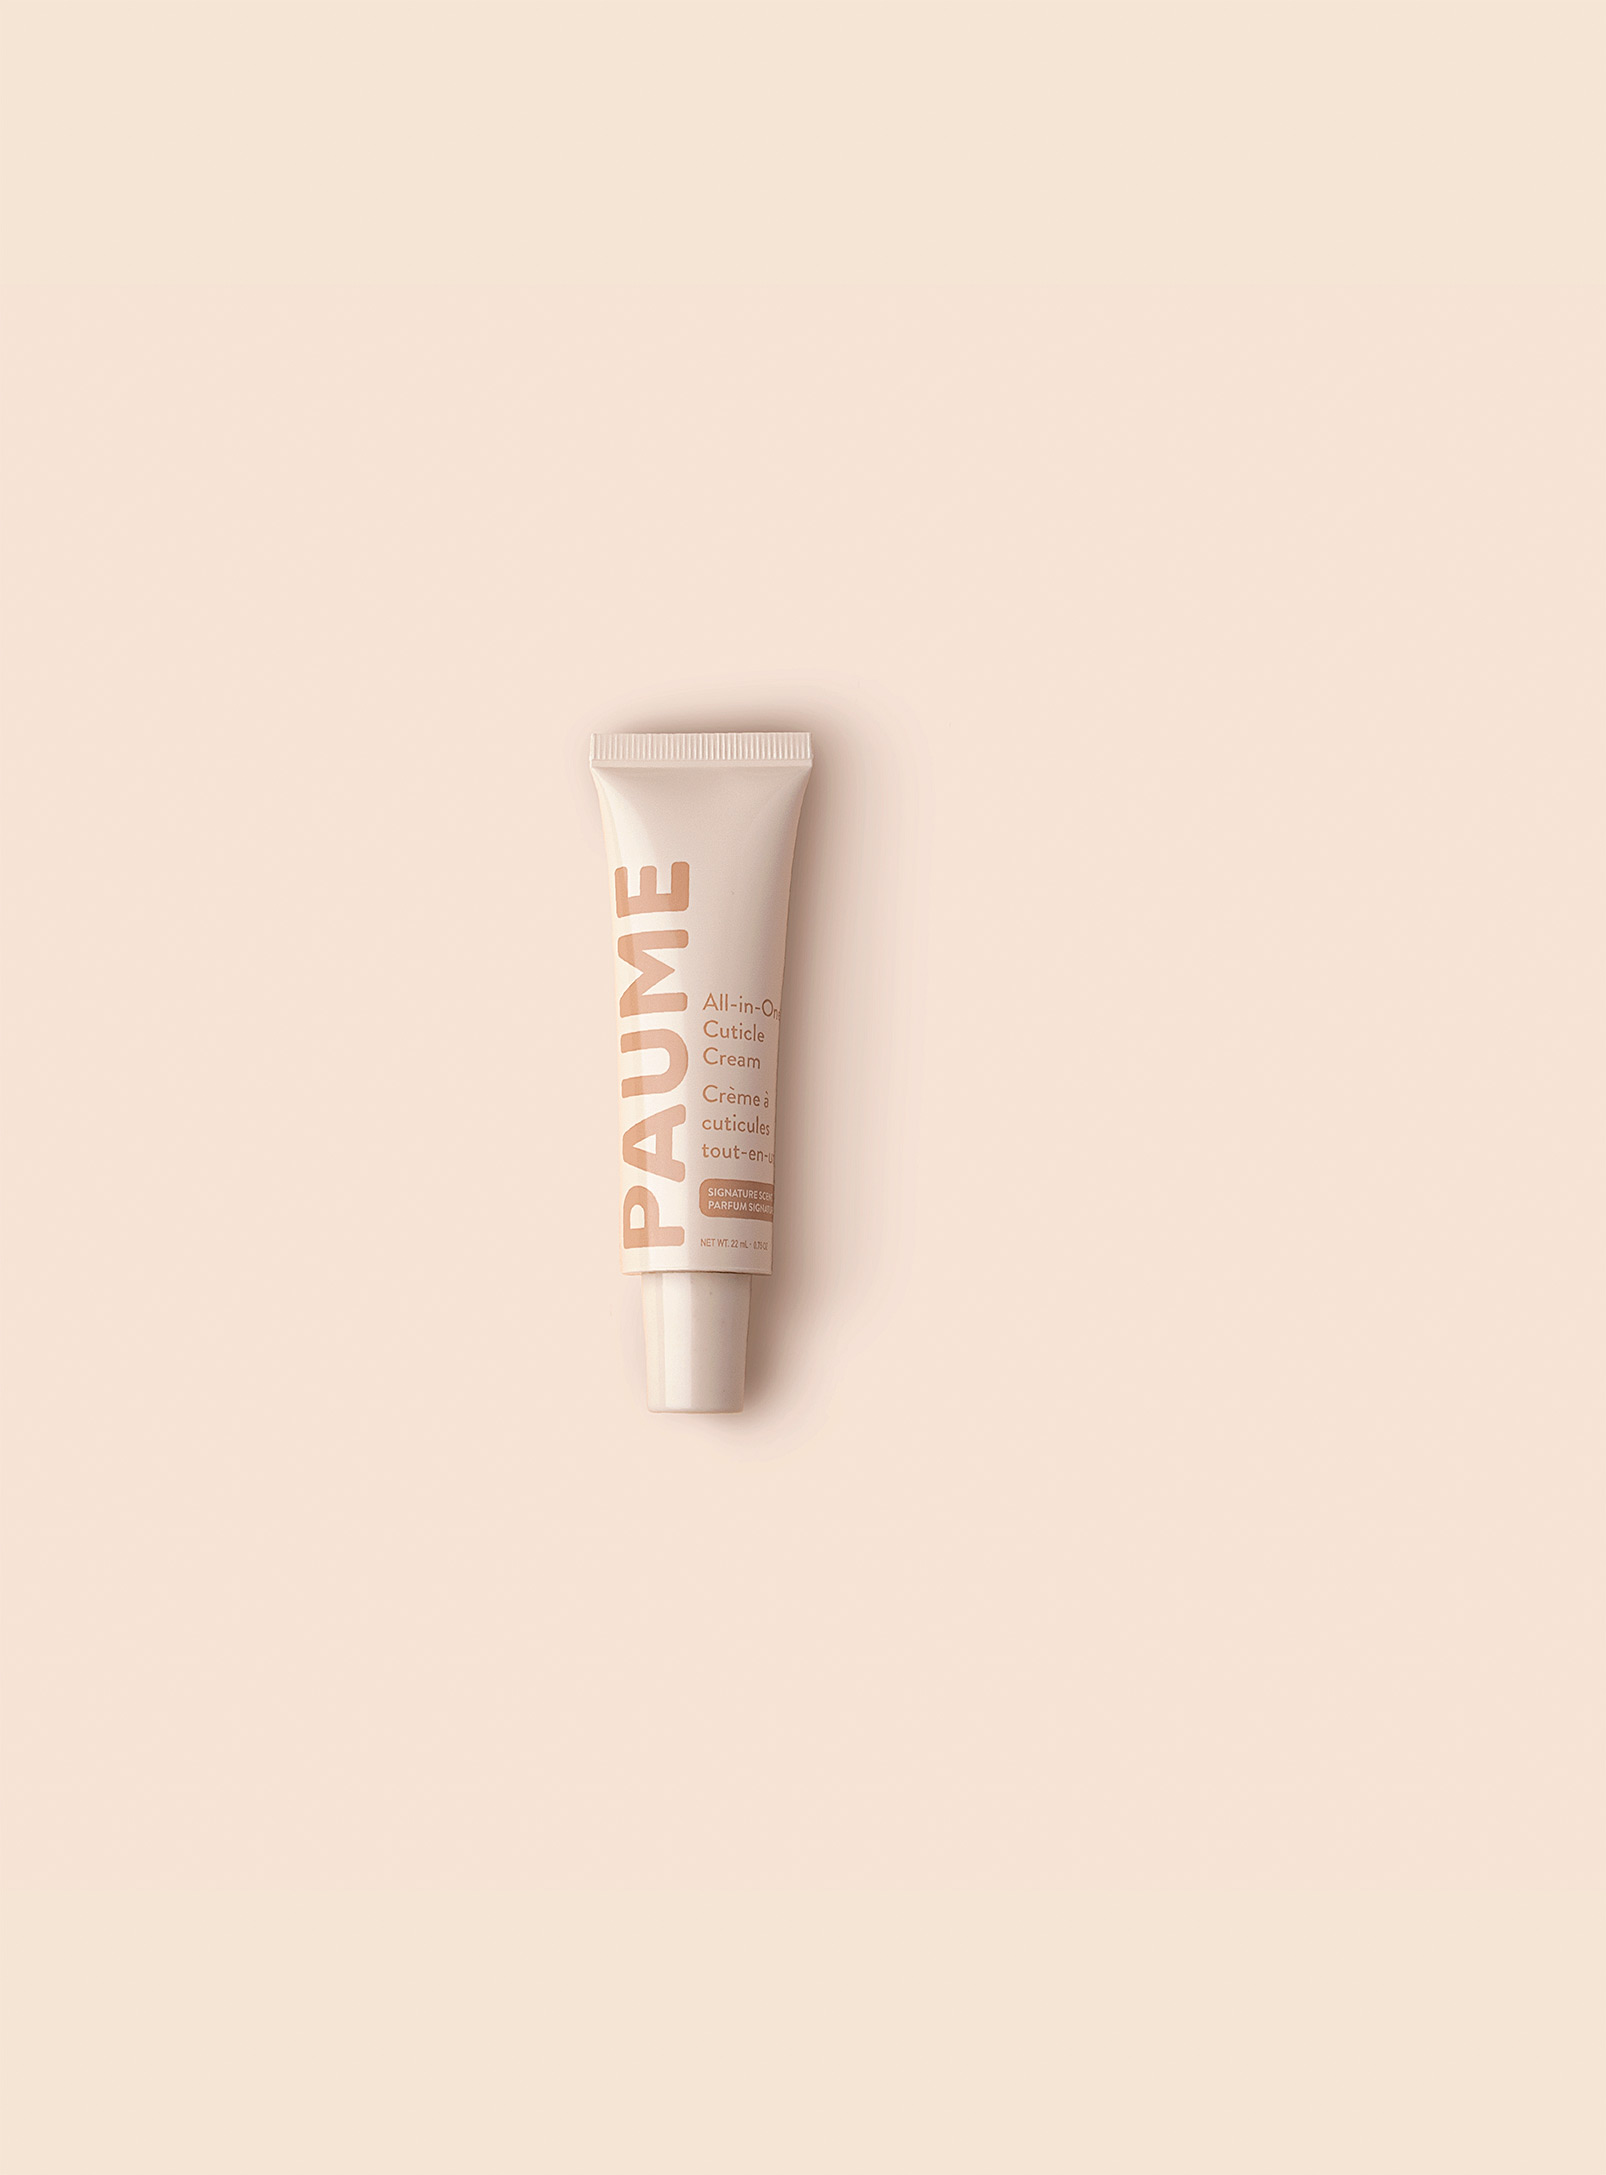 Paume - All-in-one cuticle cream